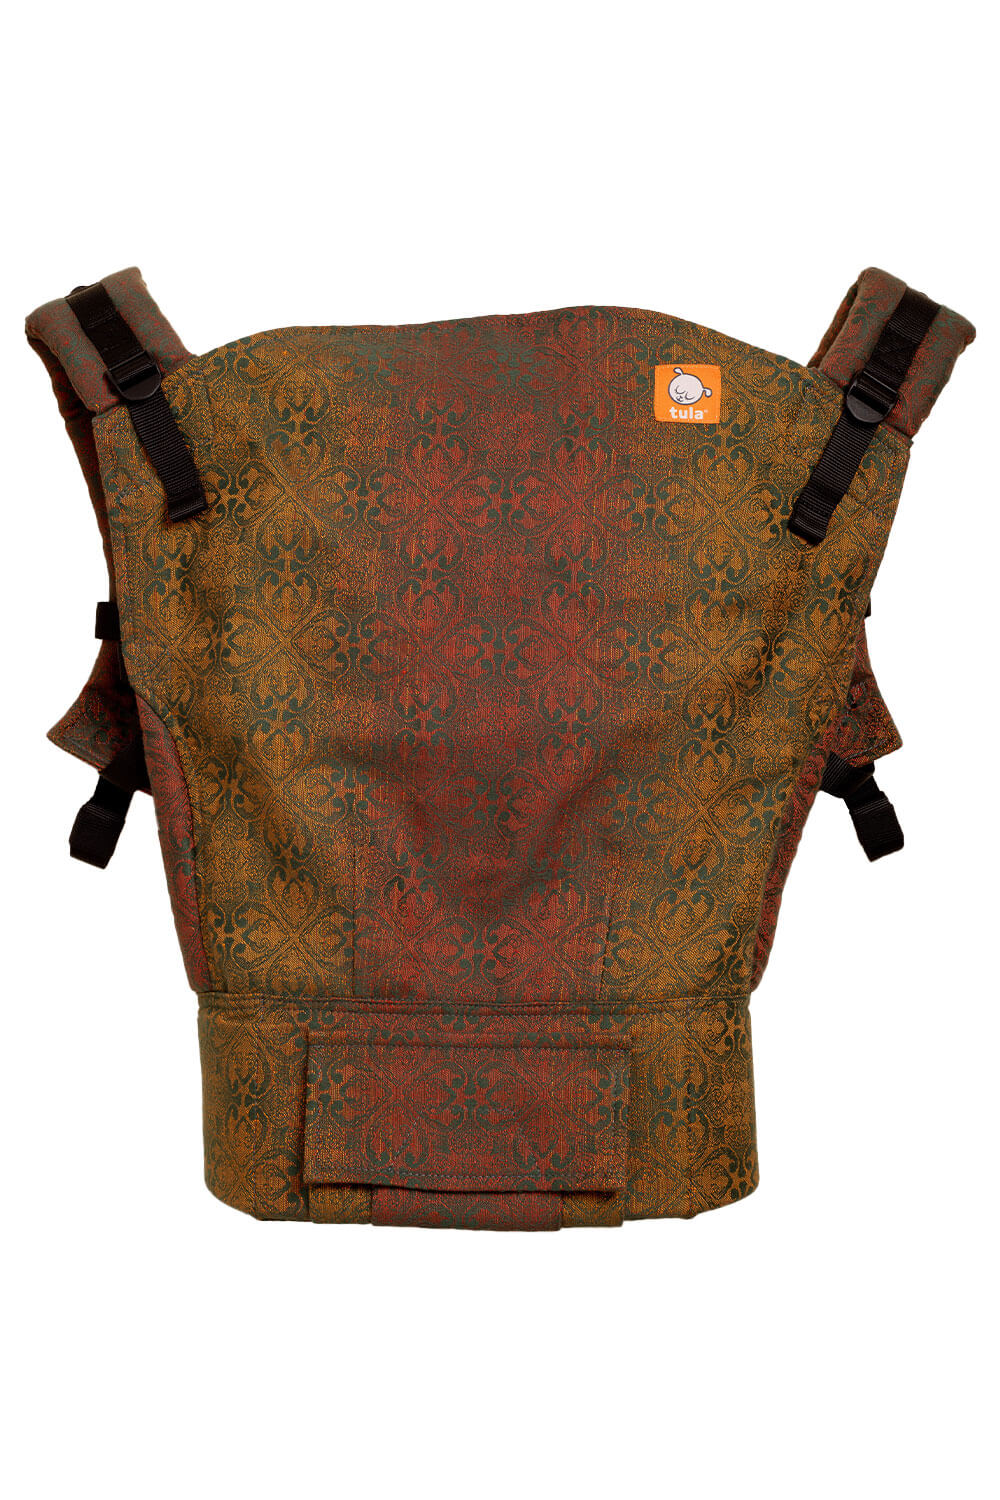 Victoriana Hunter - Signature Woven Toddler Carrier